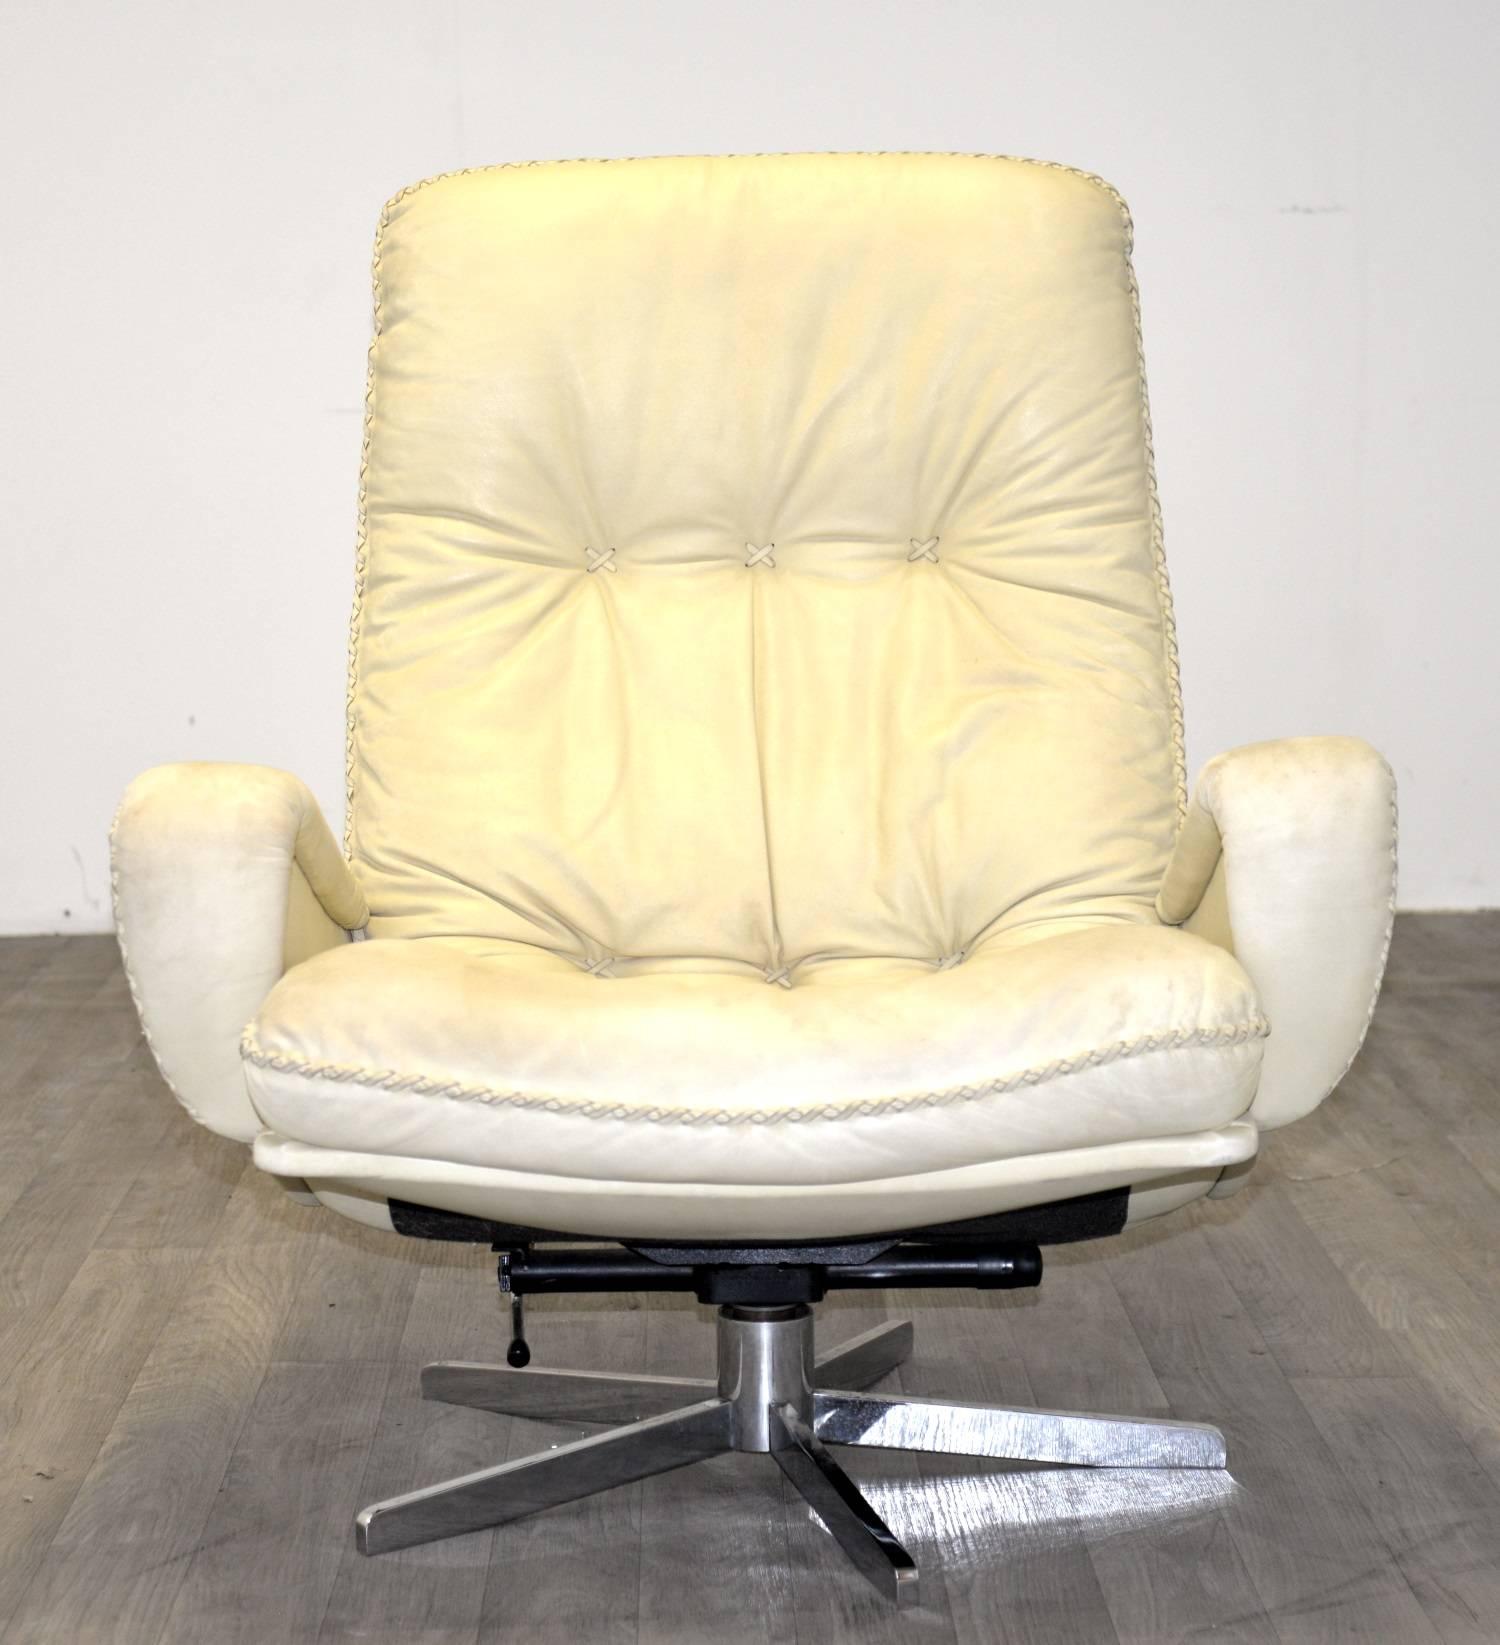 Discounted airfreight for our US Continent and International customers (from 2 weeks door to door)

We are delighted to bring to you an ultra rare and highly desirable De Sede S 231 vintage lounge swivel club armchair. Built in the late 1960s by De